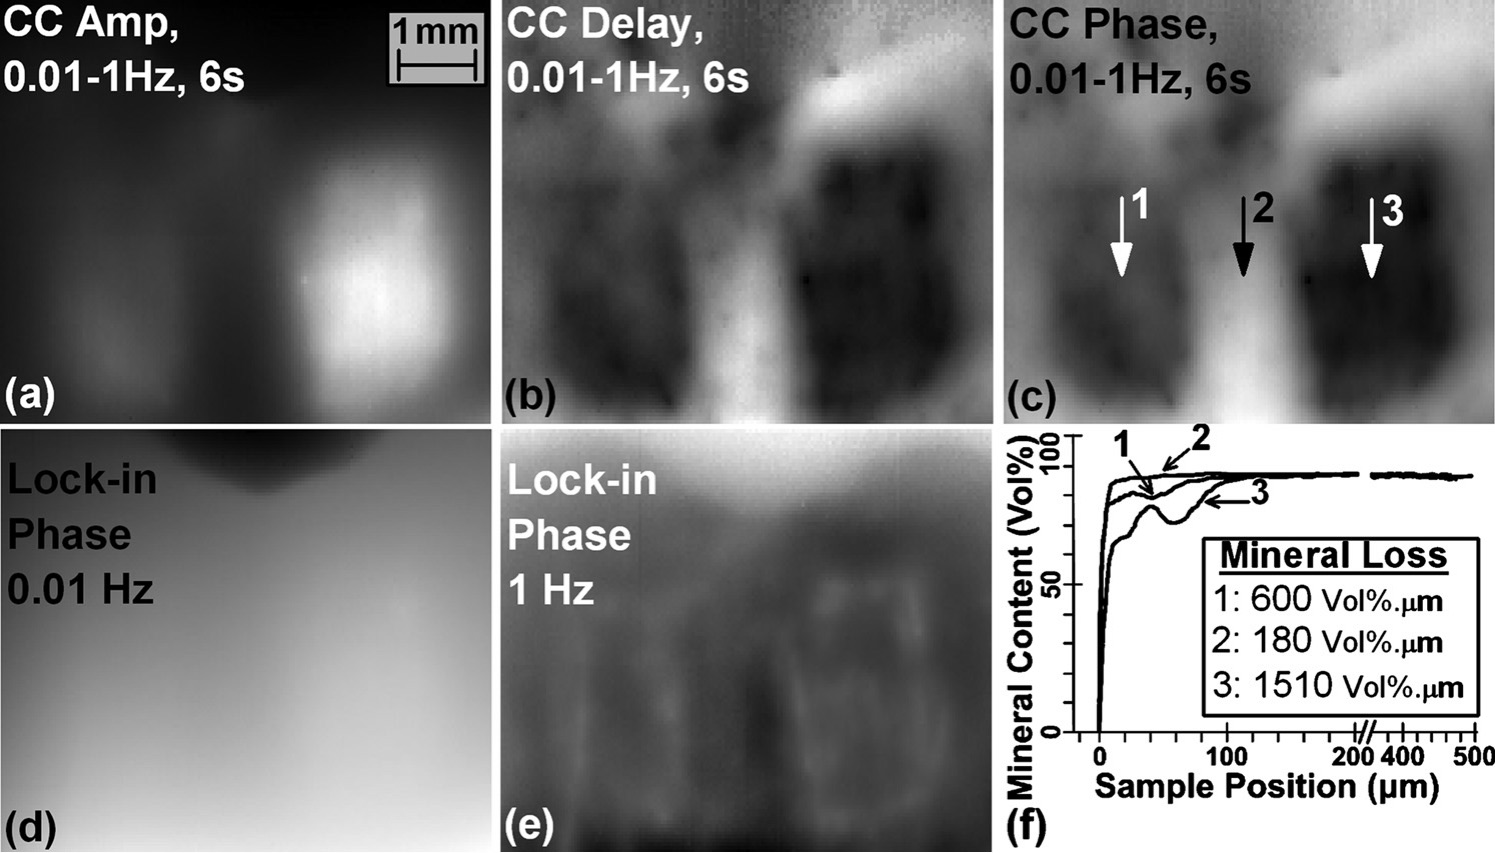 Thermophotonic radar and phase lock-in imaging